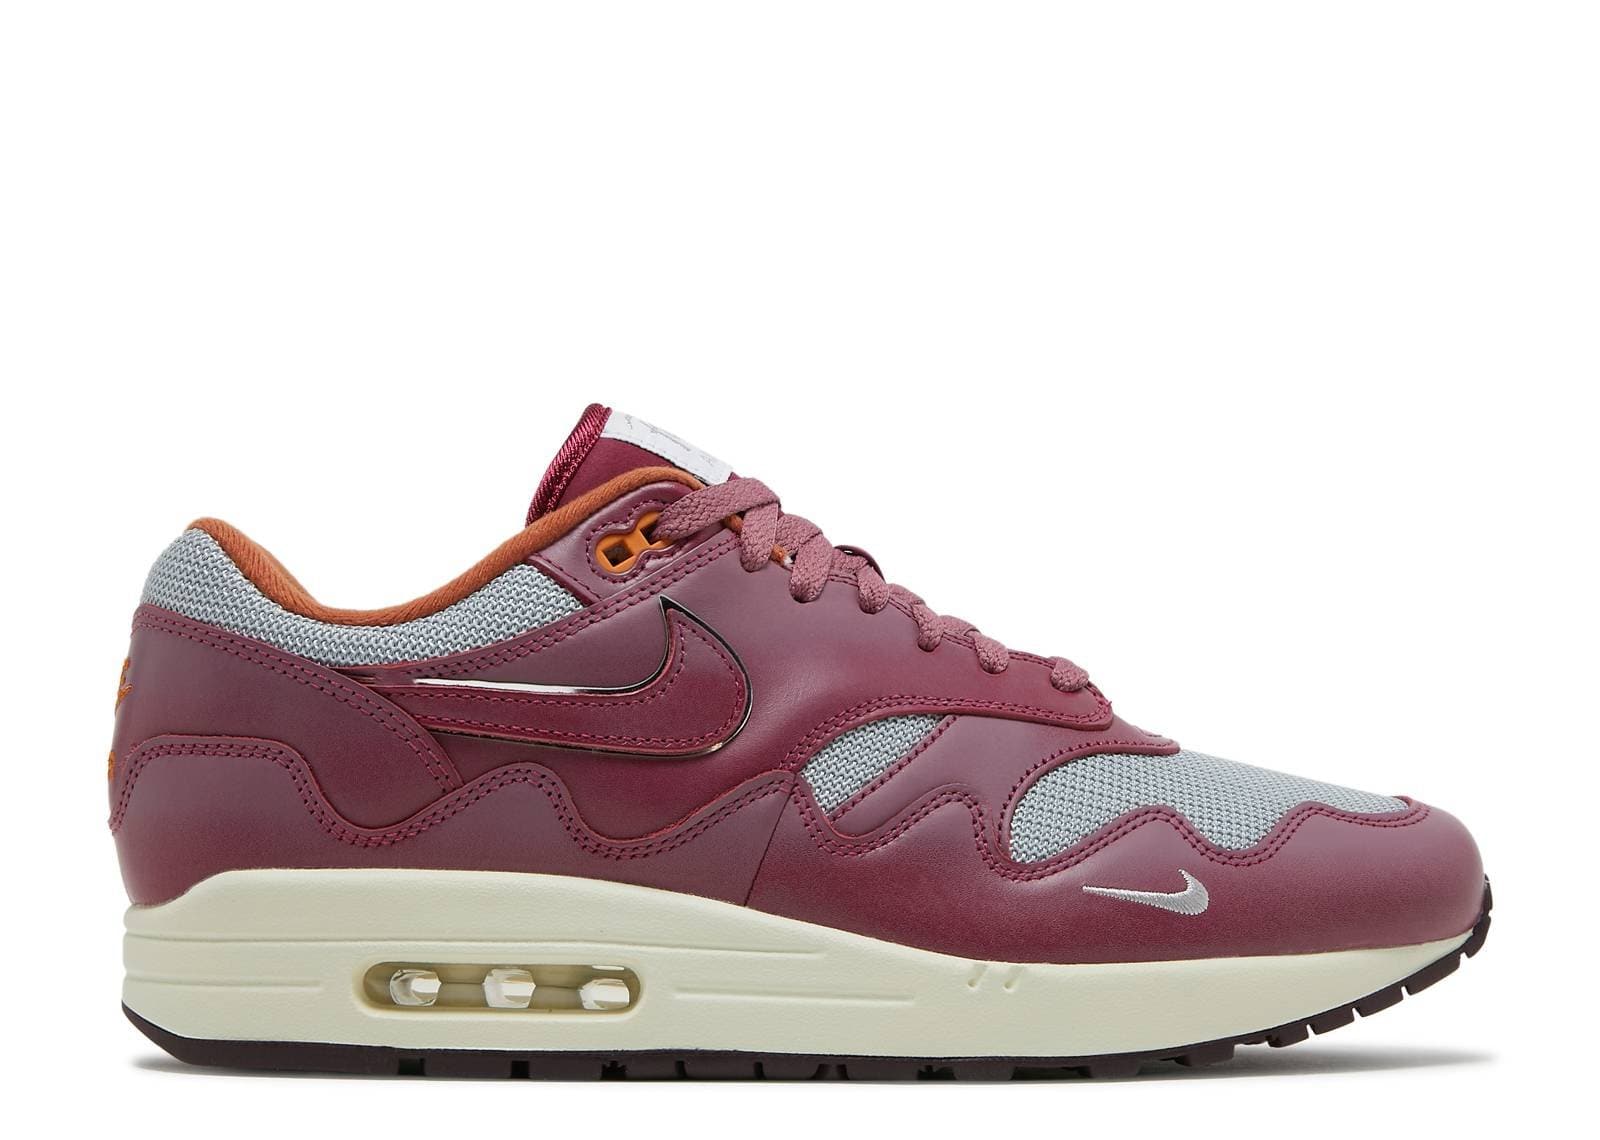 Nike Air Max 1 Patta Waves Rush Maroon (with Bracelet) - The Magnolia Park